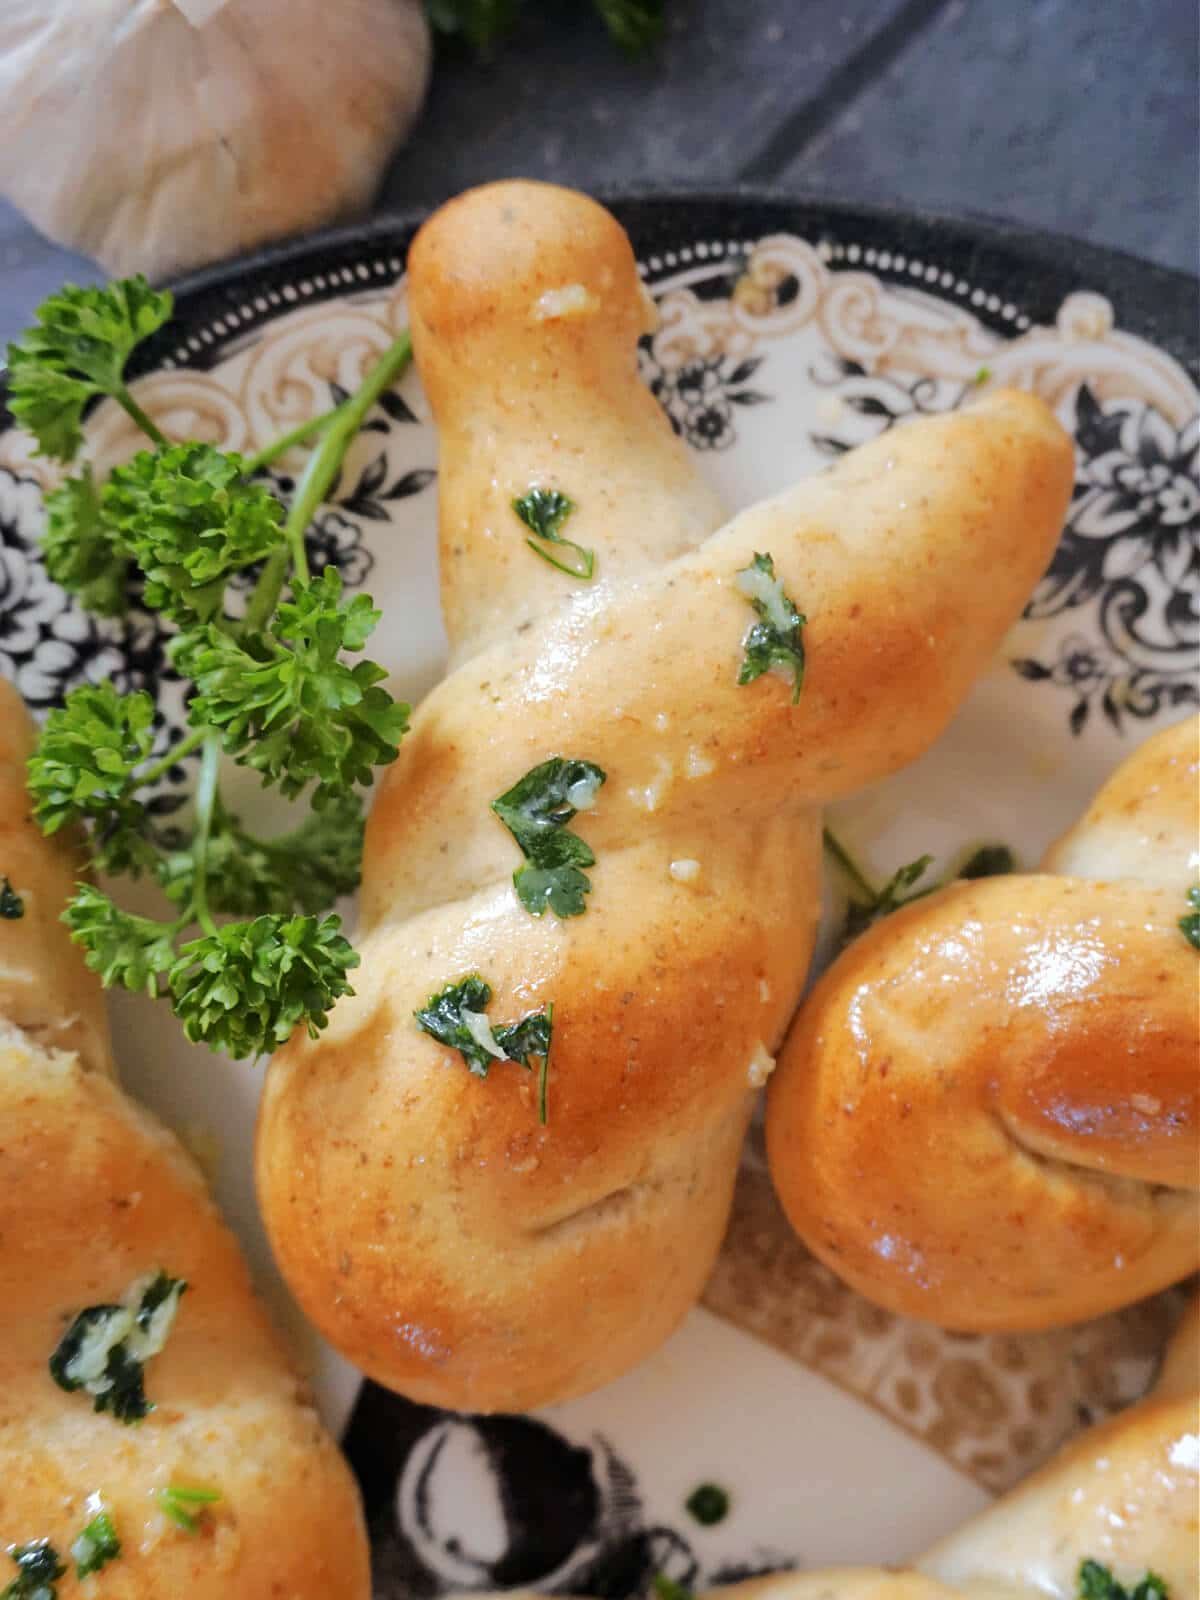 Overhead shot of a bunny-shaped garlic knot on a plate with fresh parsley